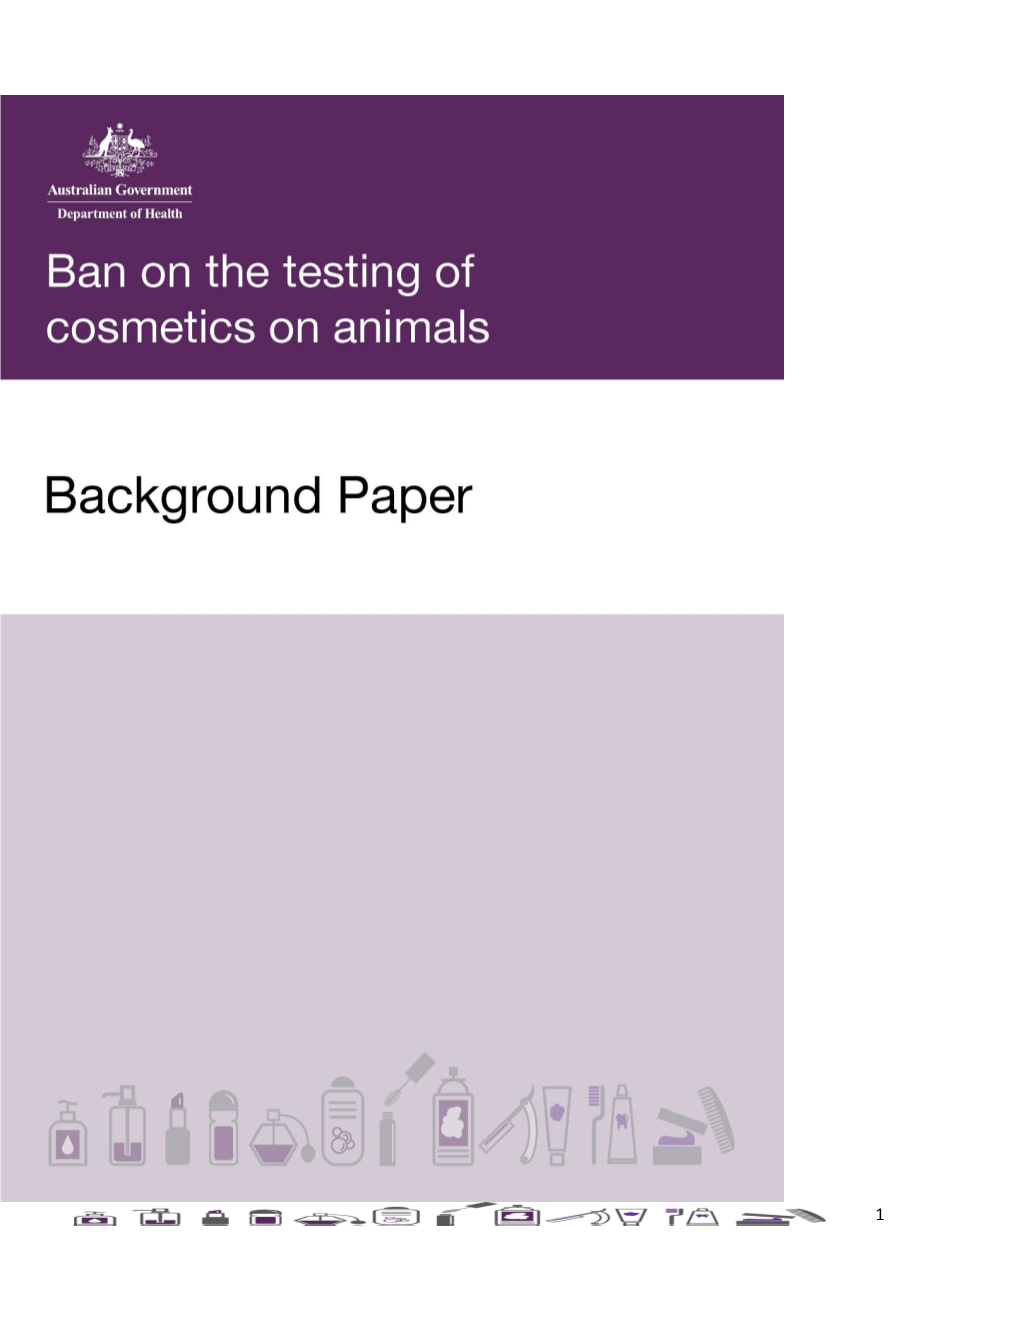 Ban on the Testing of Cosmetics on Animals